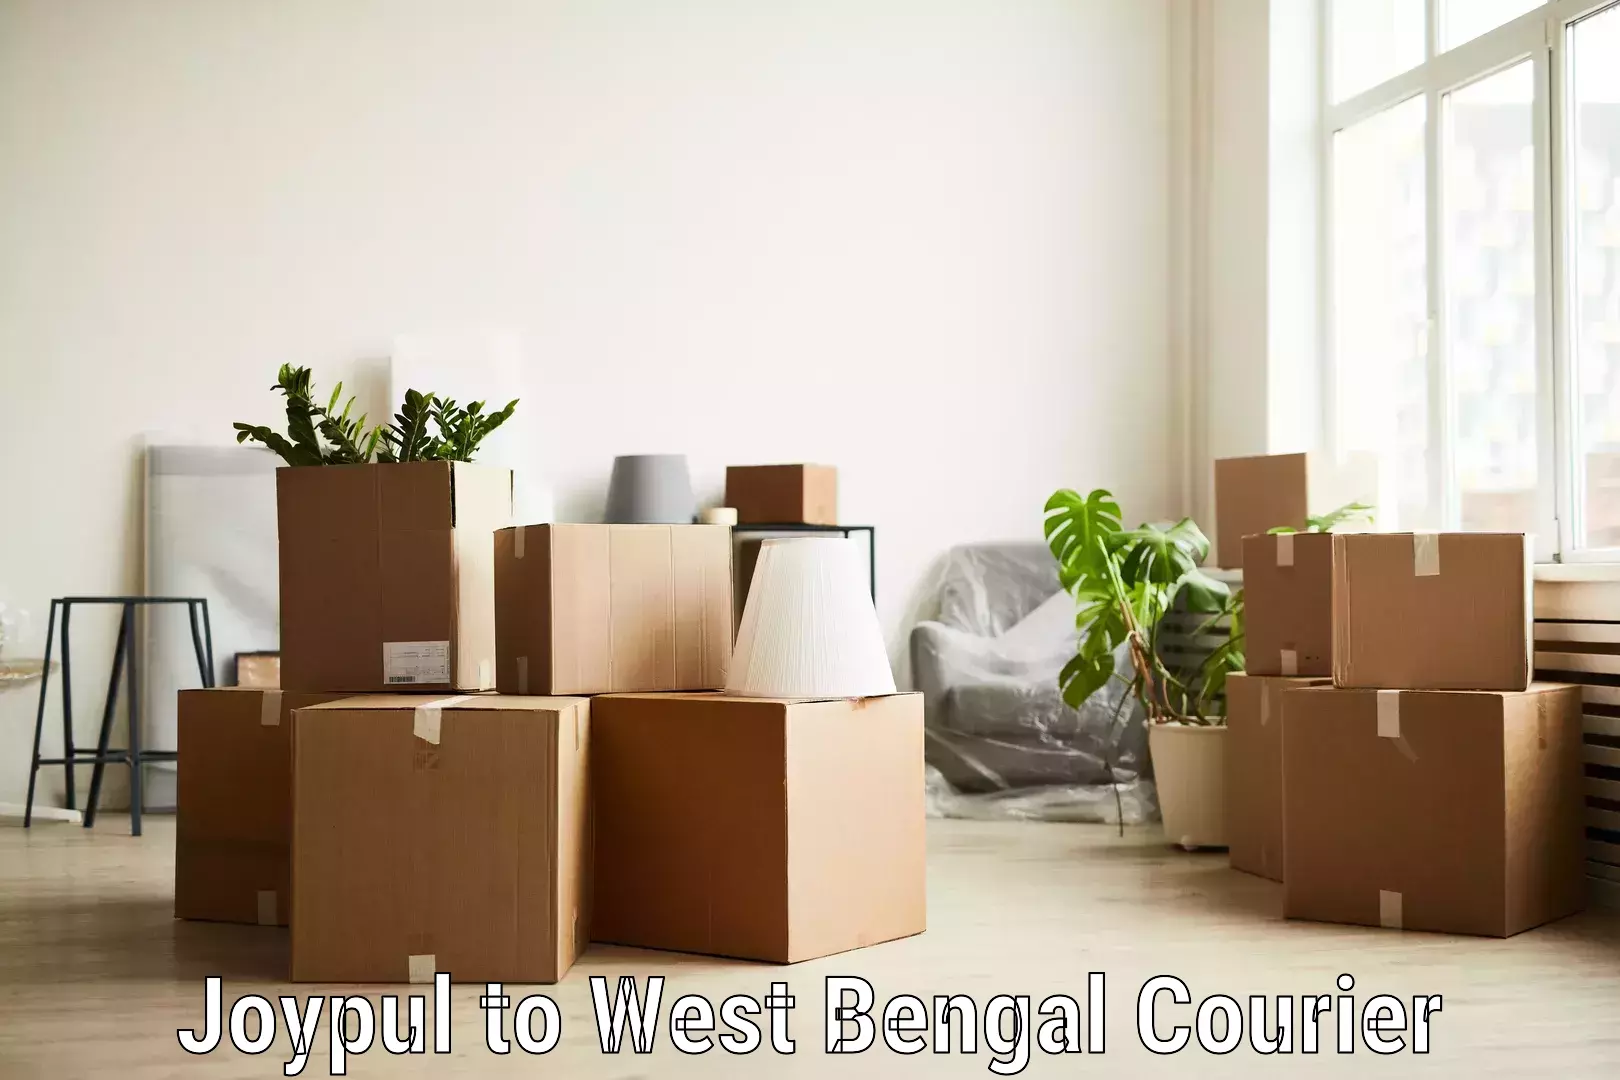 Urgent courier needs in Joypul to West Bengal